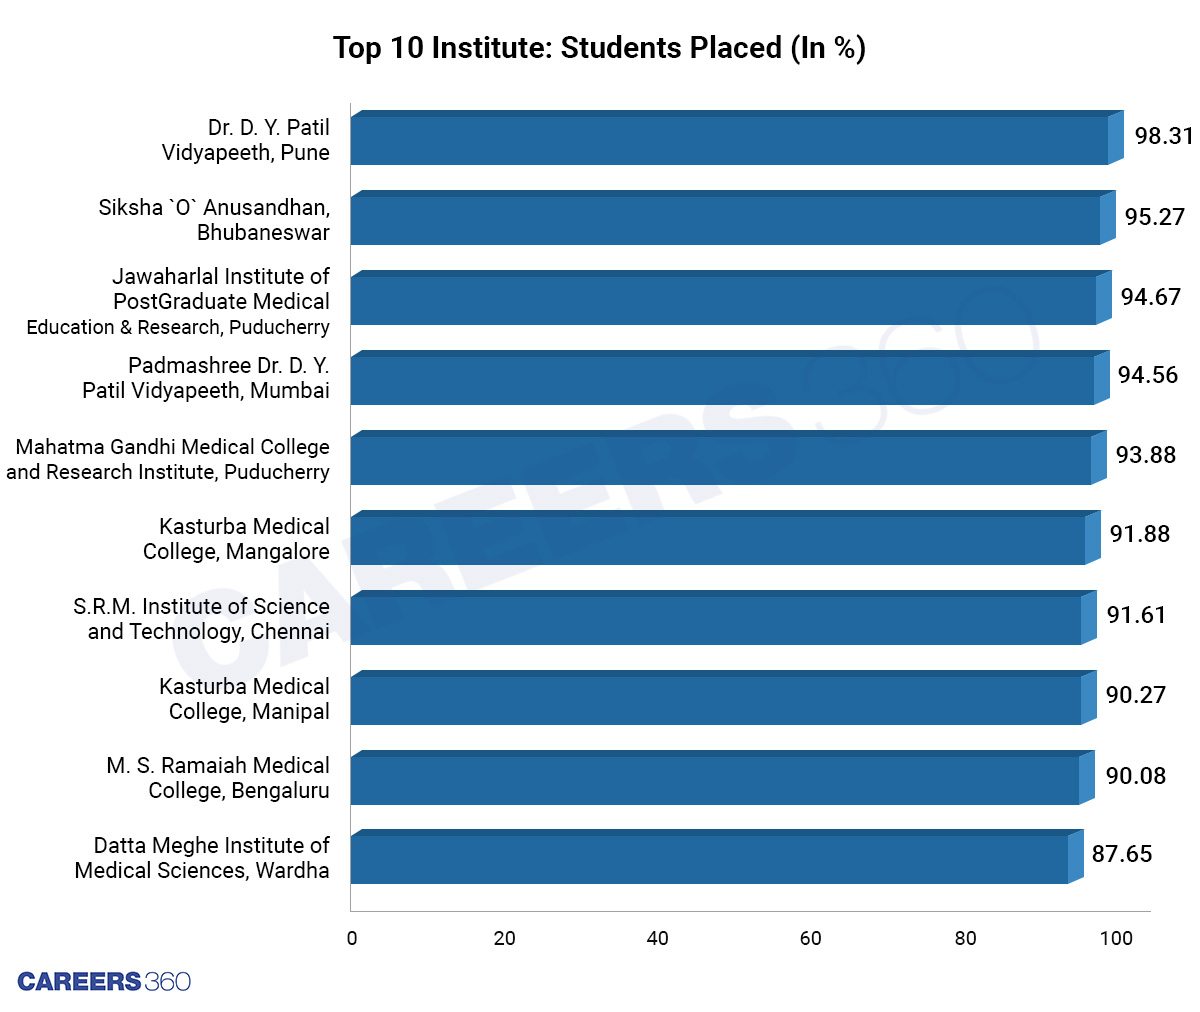 Top 10 Medical College: Placement Percentage